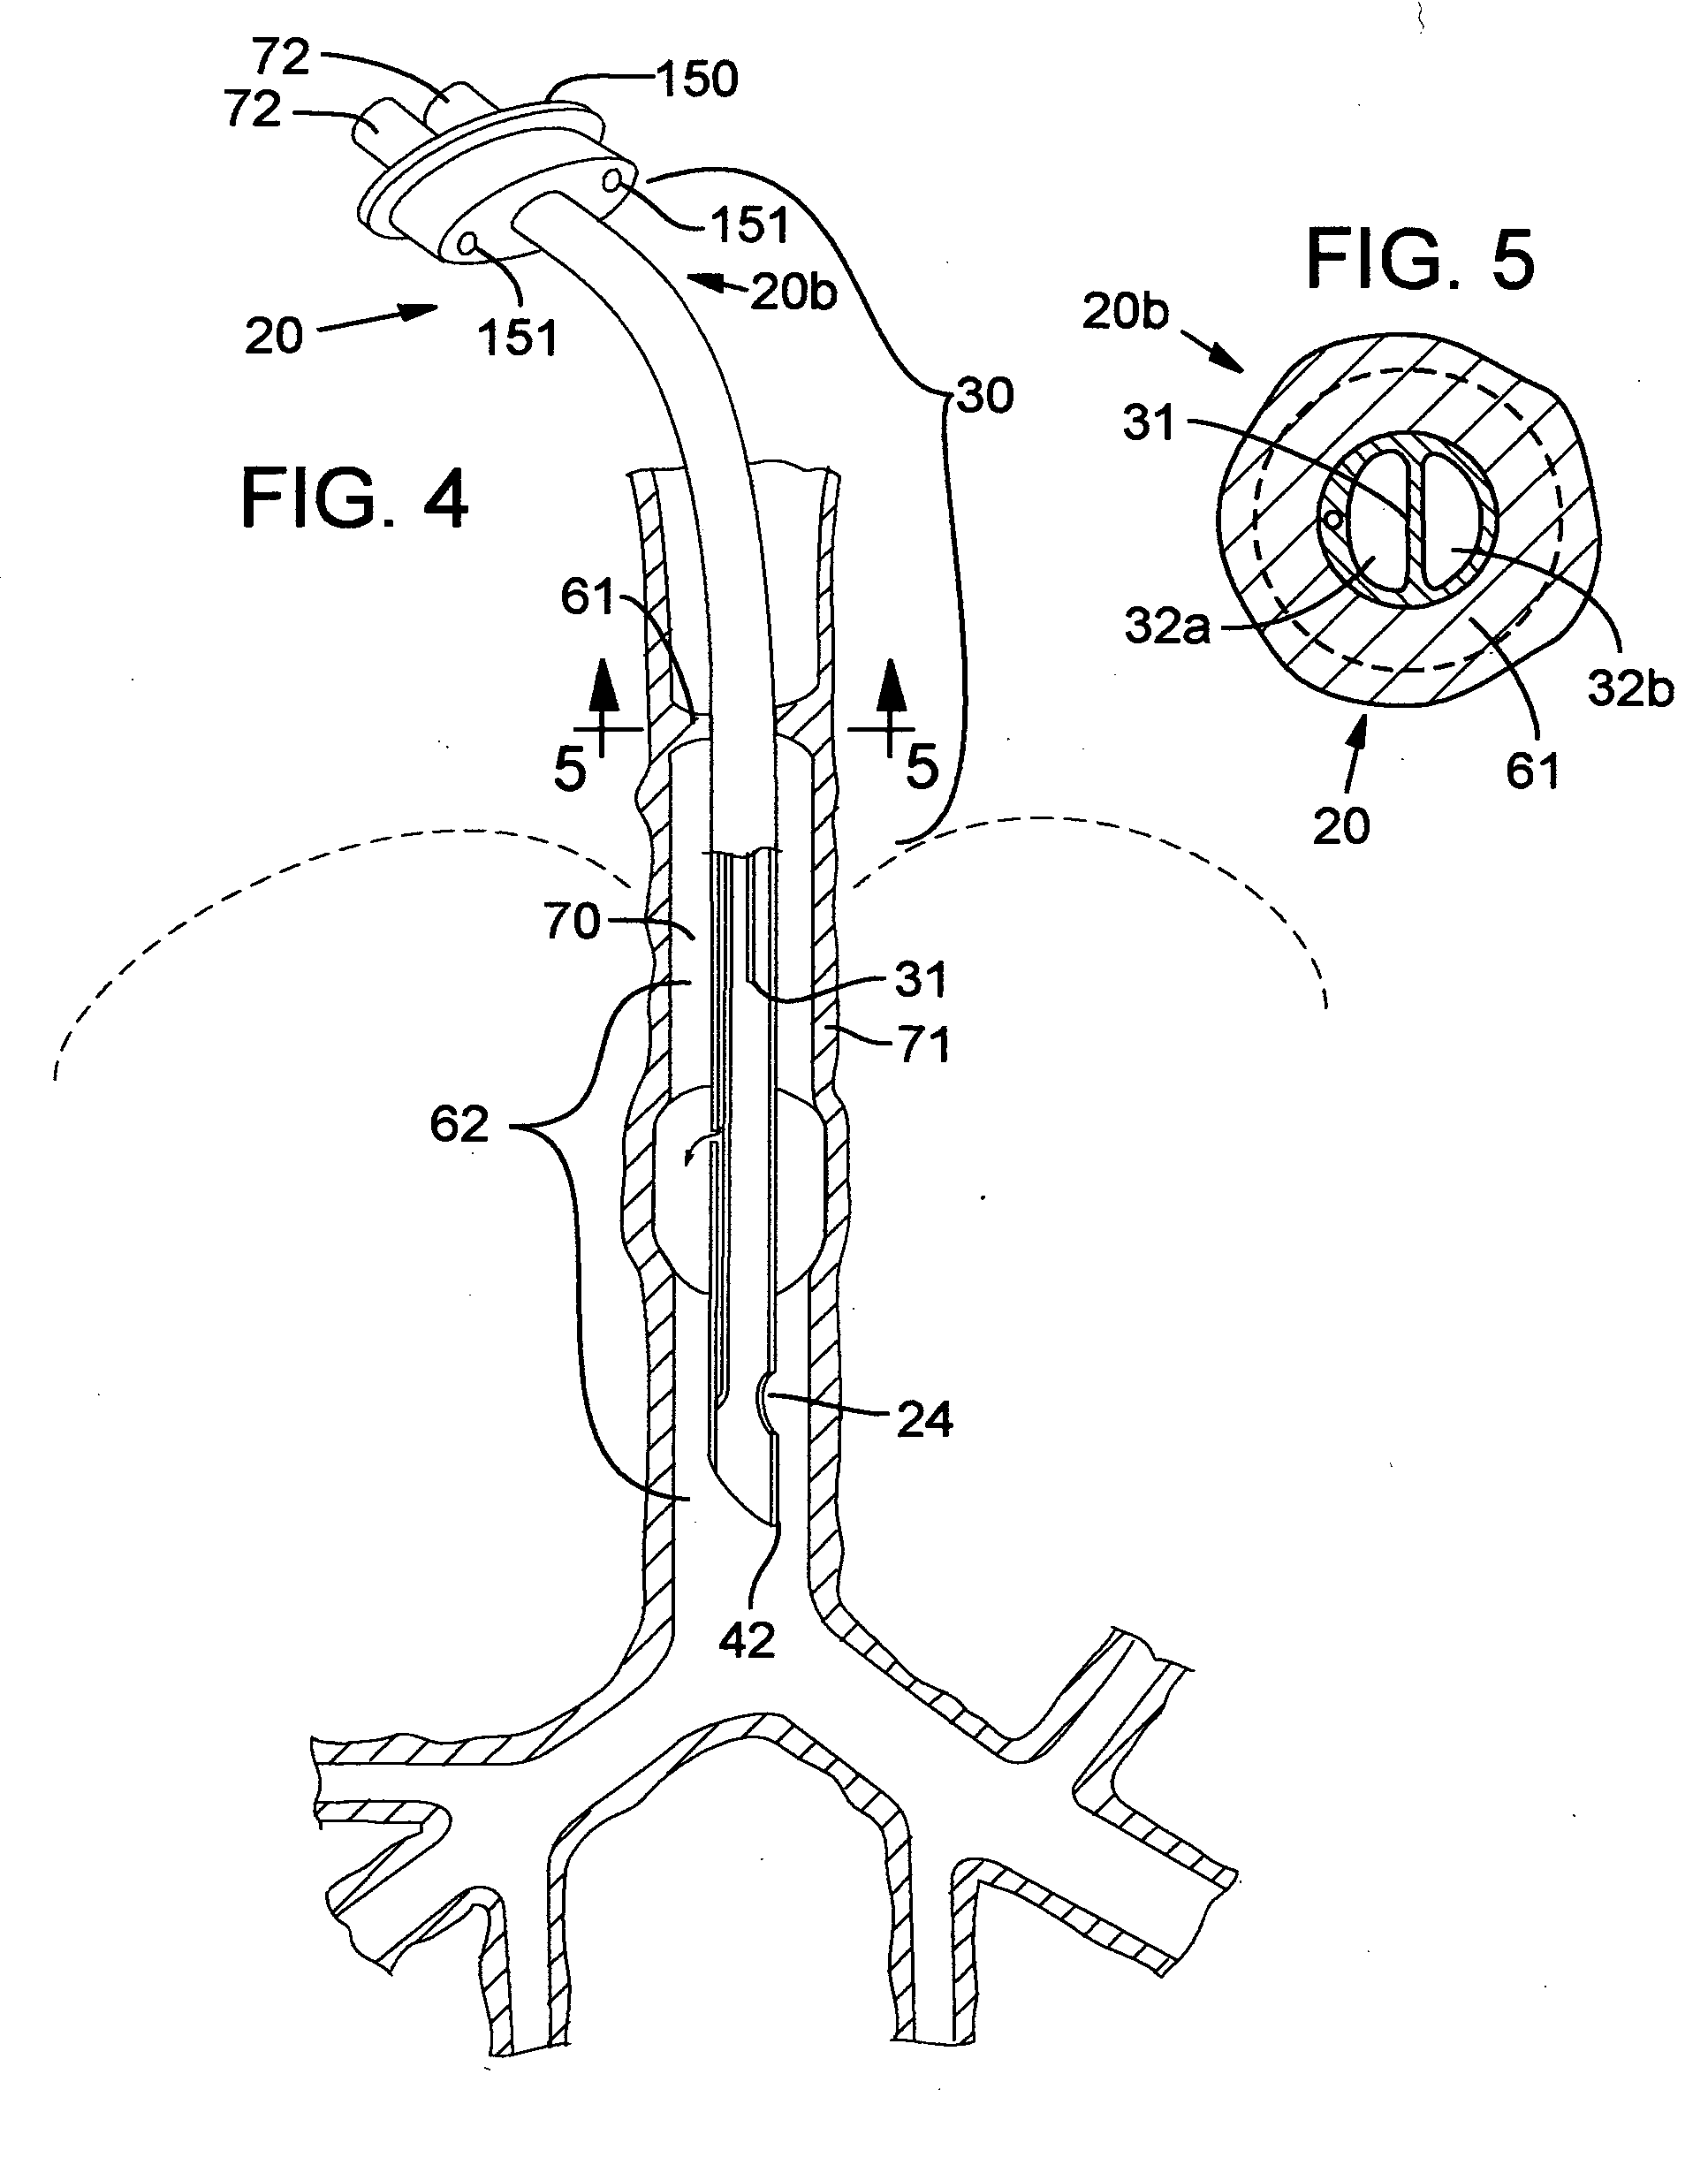 Secretion clearing ventilation catheter and airway management system